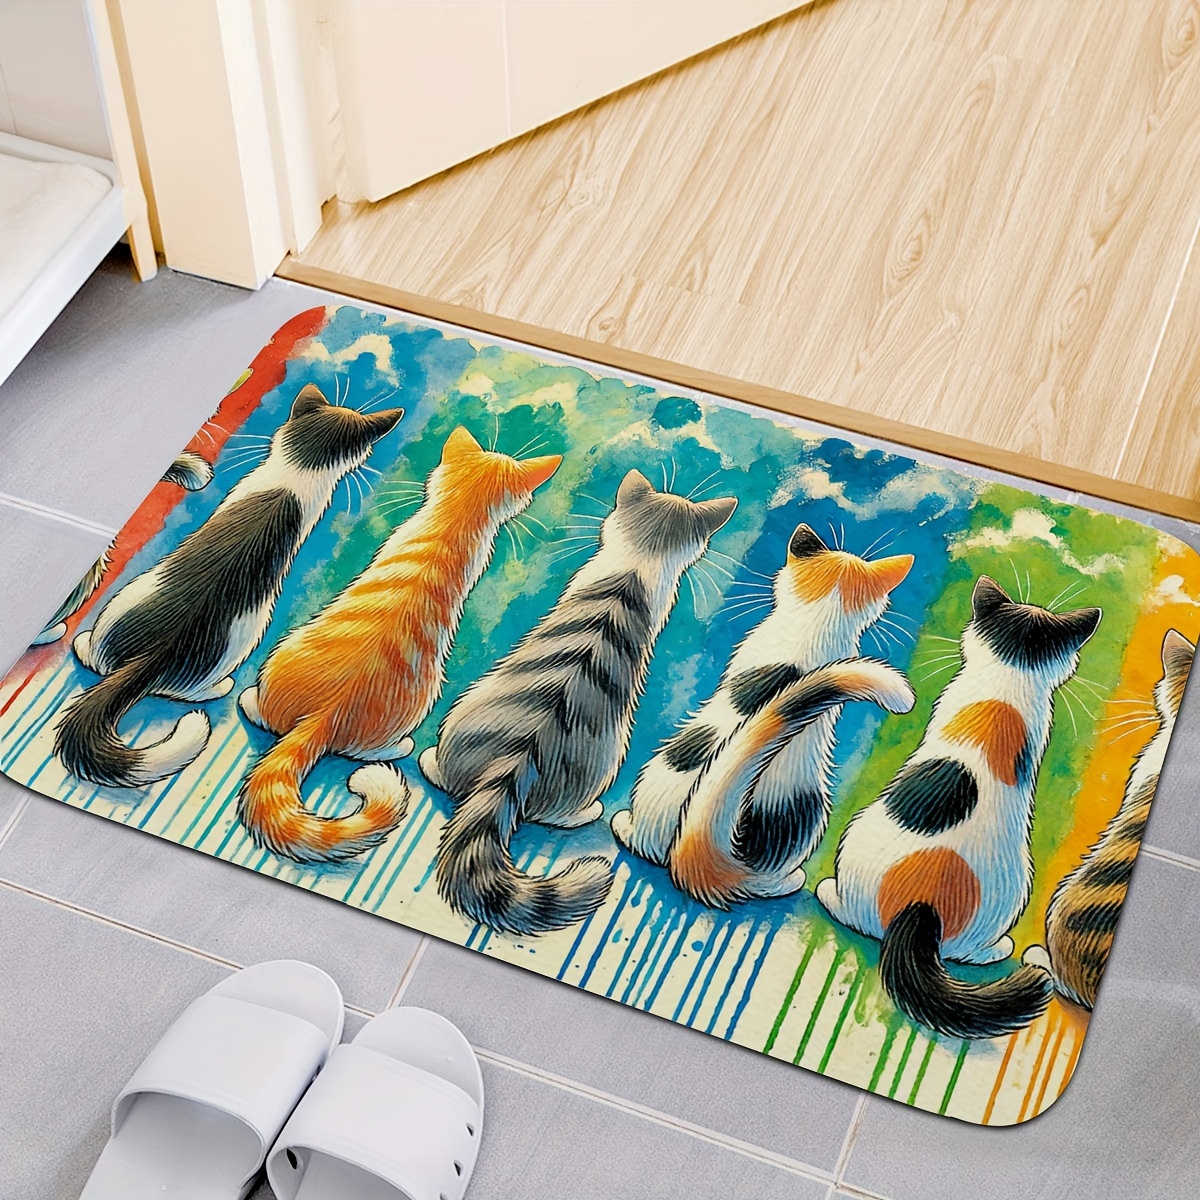 

Non-slip Machine Washable Woven Bath Rug With Cute Cat Friends Pattern - Polyester Tpr-backed Bathroom Mat 15.4x23.4 Inches For Home, Kitchen, Bedroom, Office, Or Outdoor Use